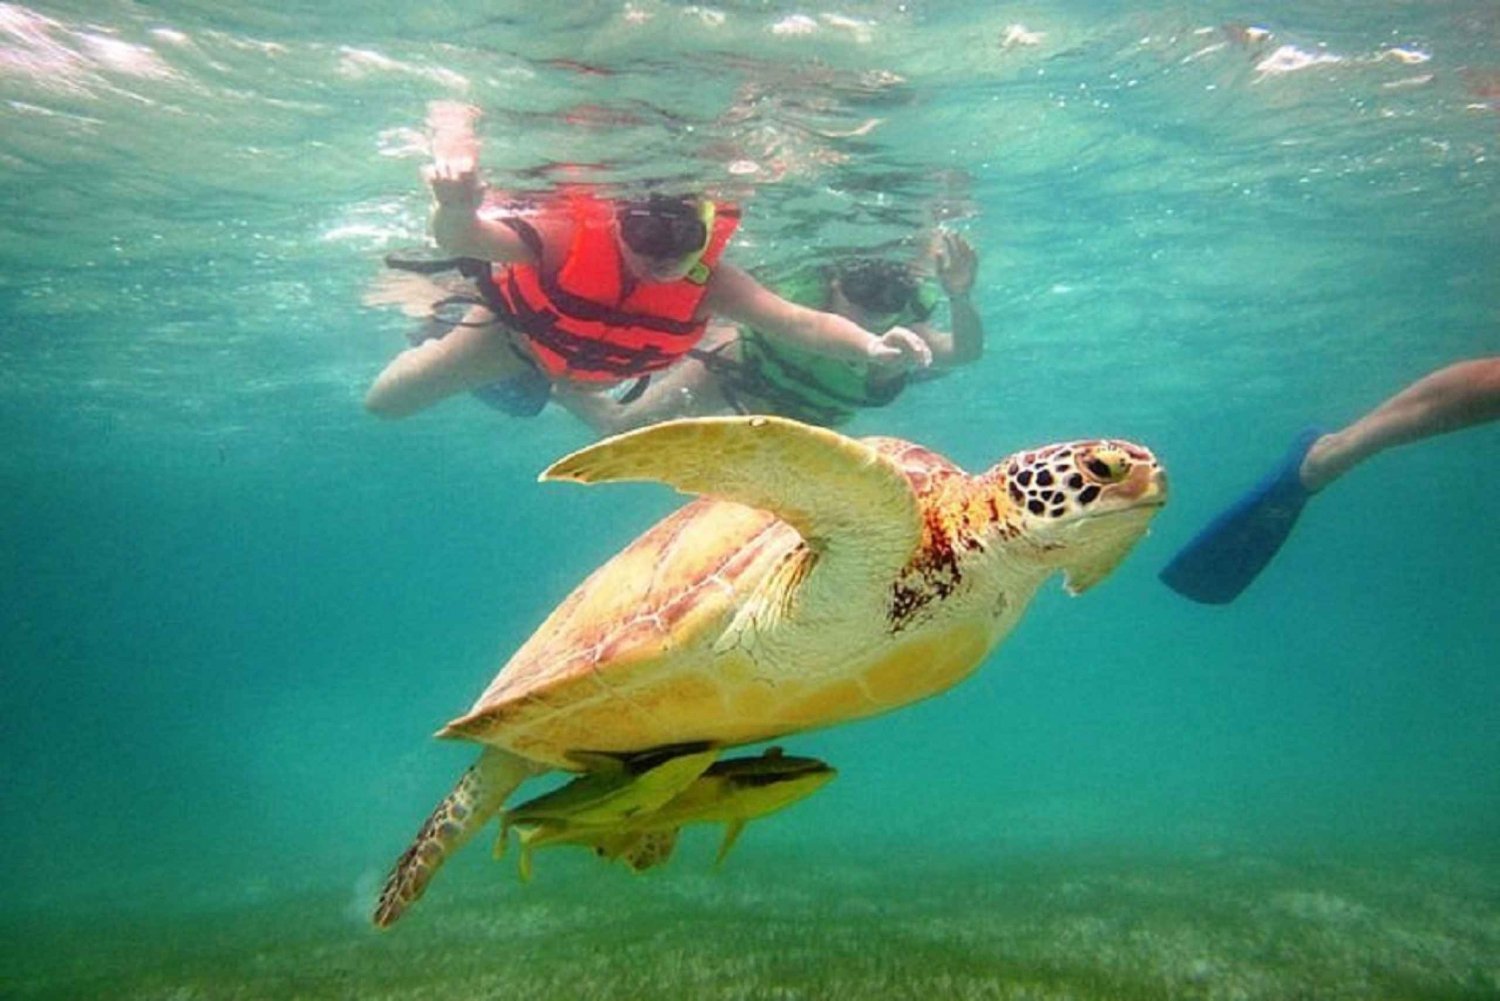 Best Swimming with turtles tours in Hotel Zone, Cancun, Mexico